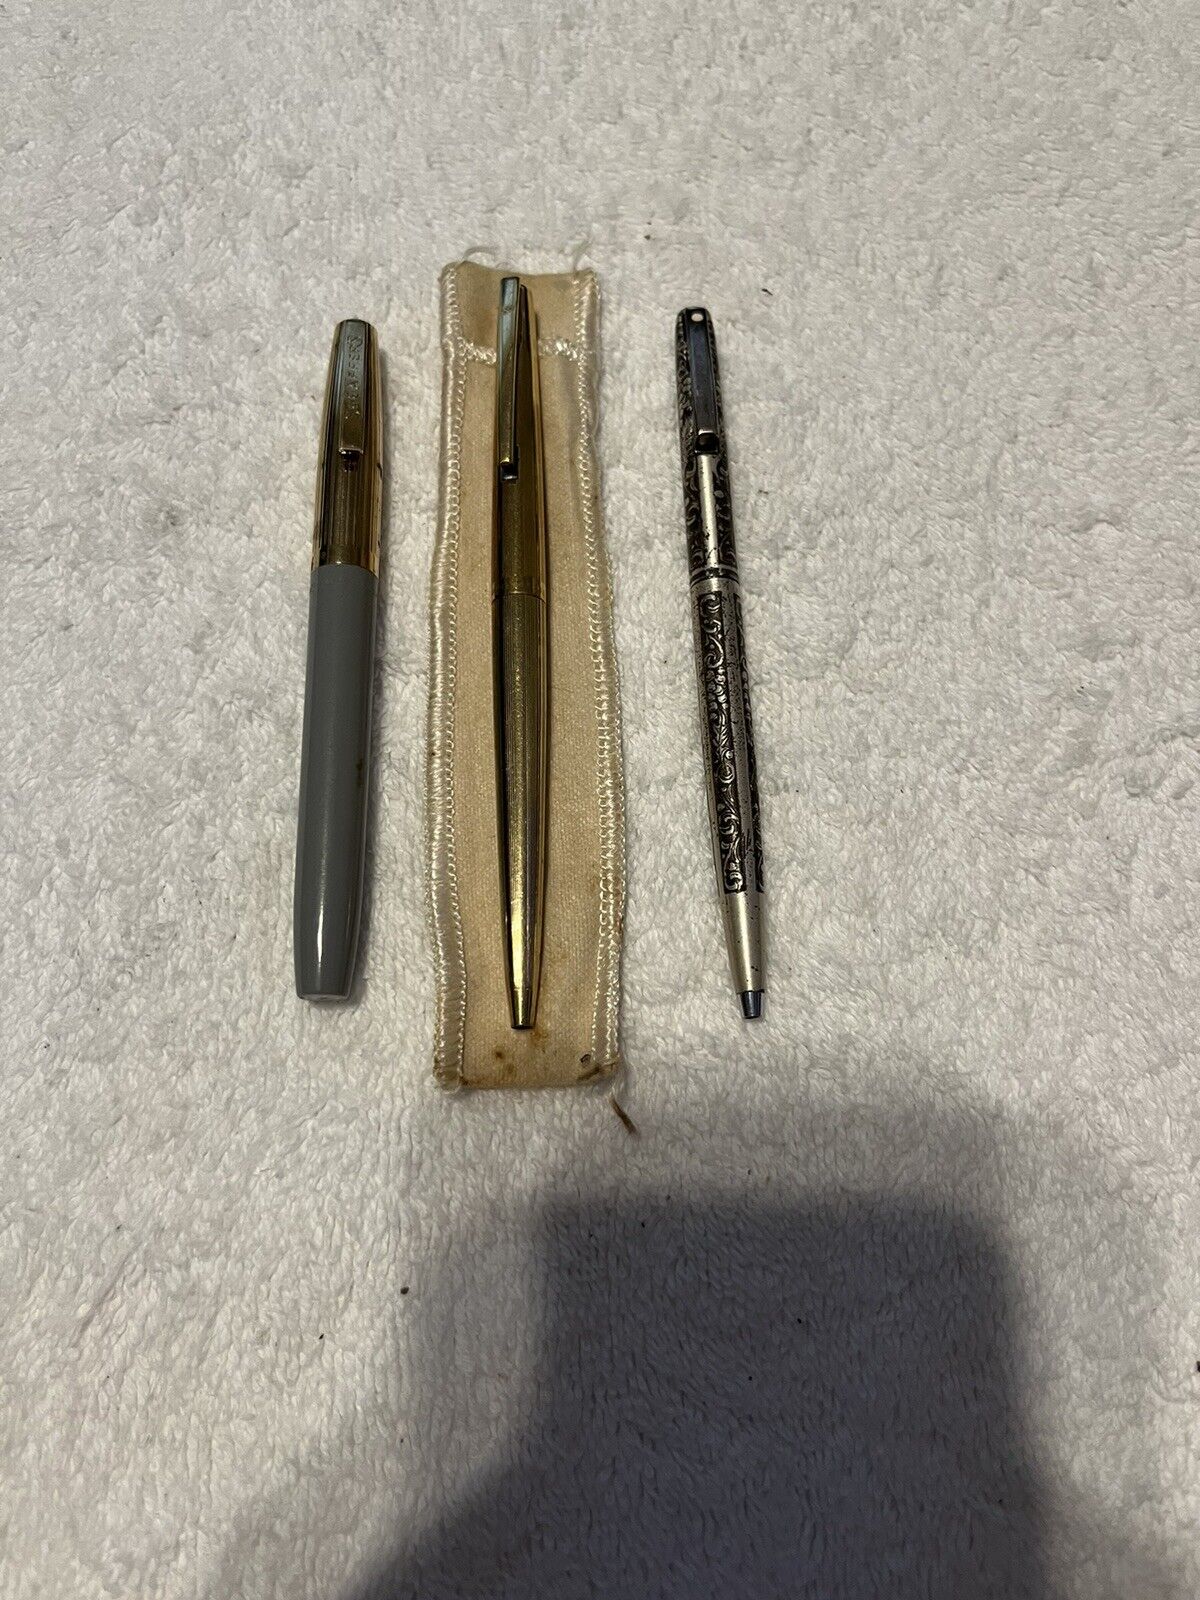 Lot of 3 Vintage Sheaffer Pens - Fountain, Gold, Grey/Black Untested Ink